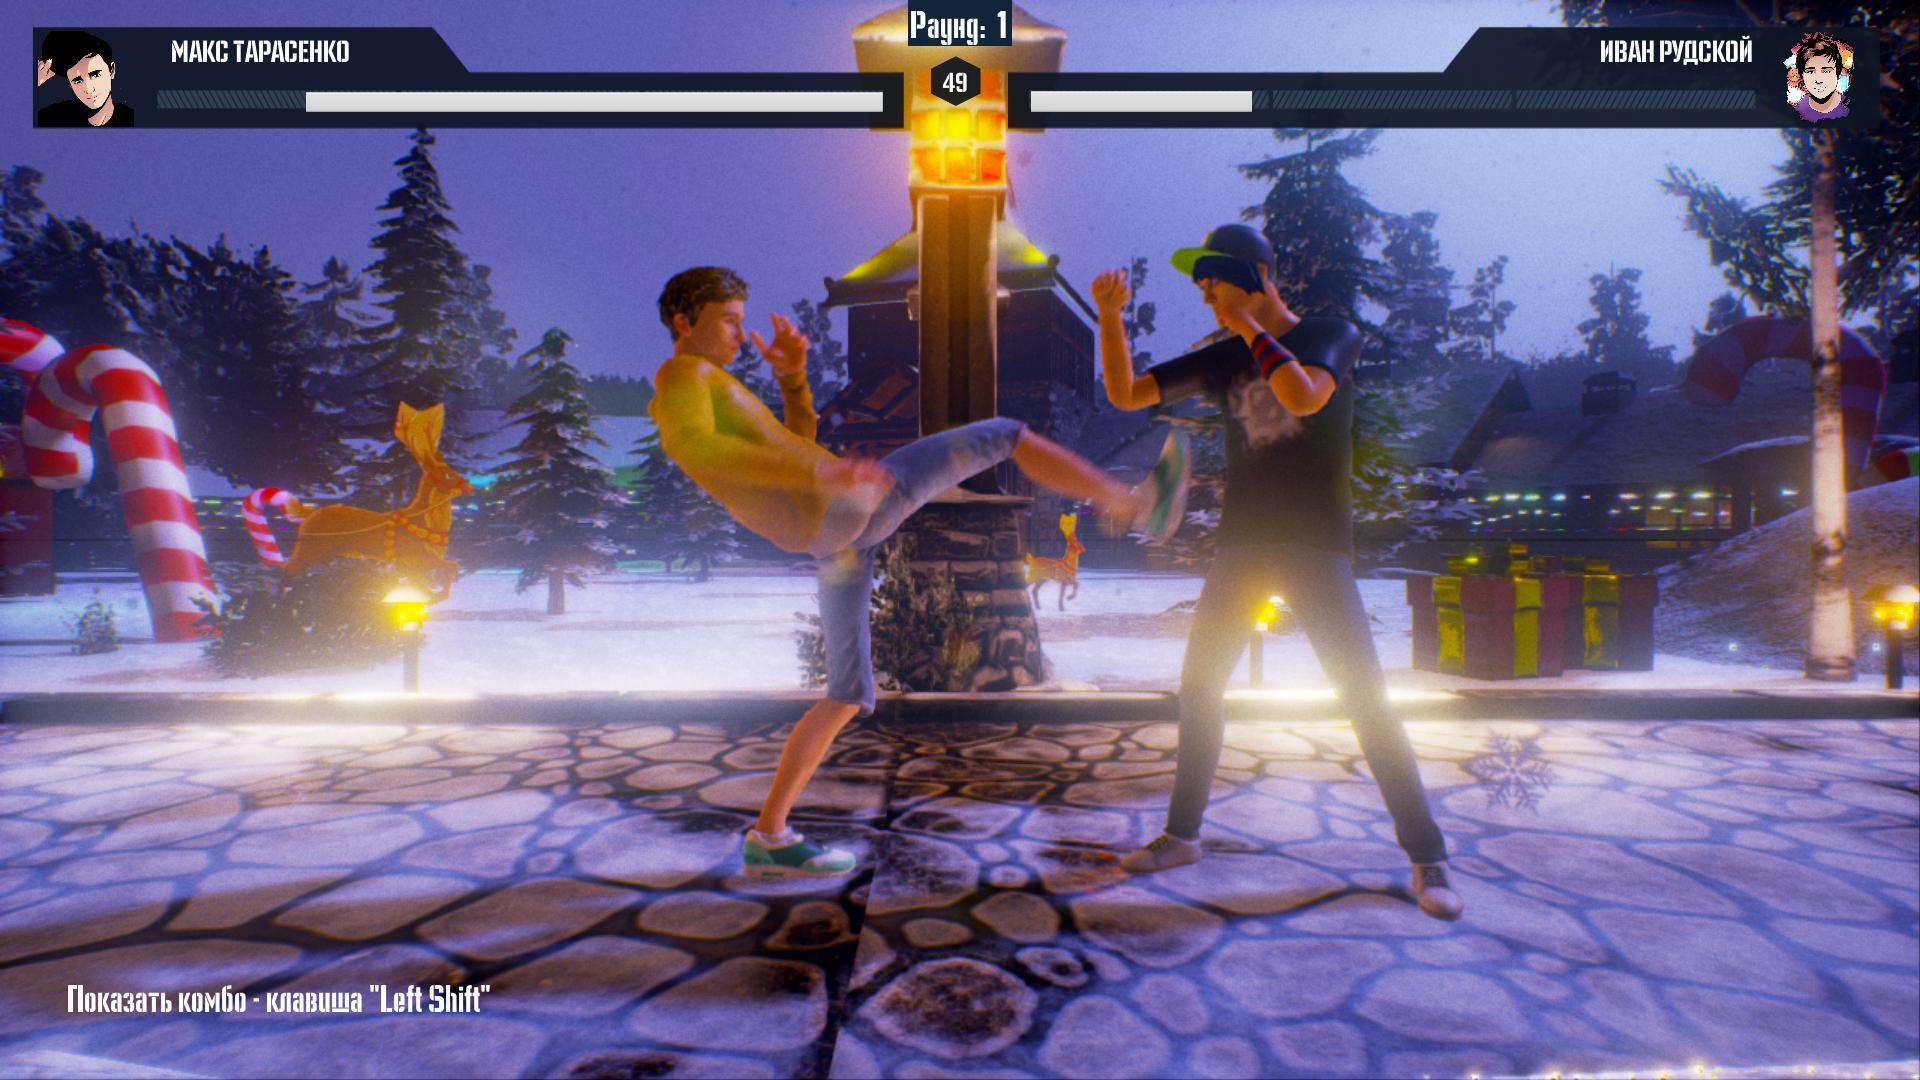 Screenshot №1 from game MY FIGHT